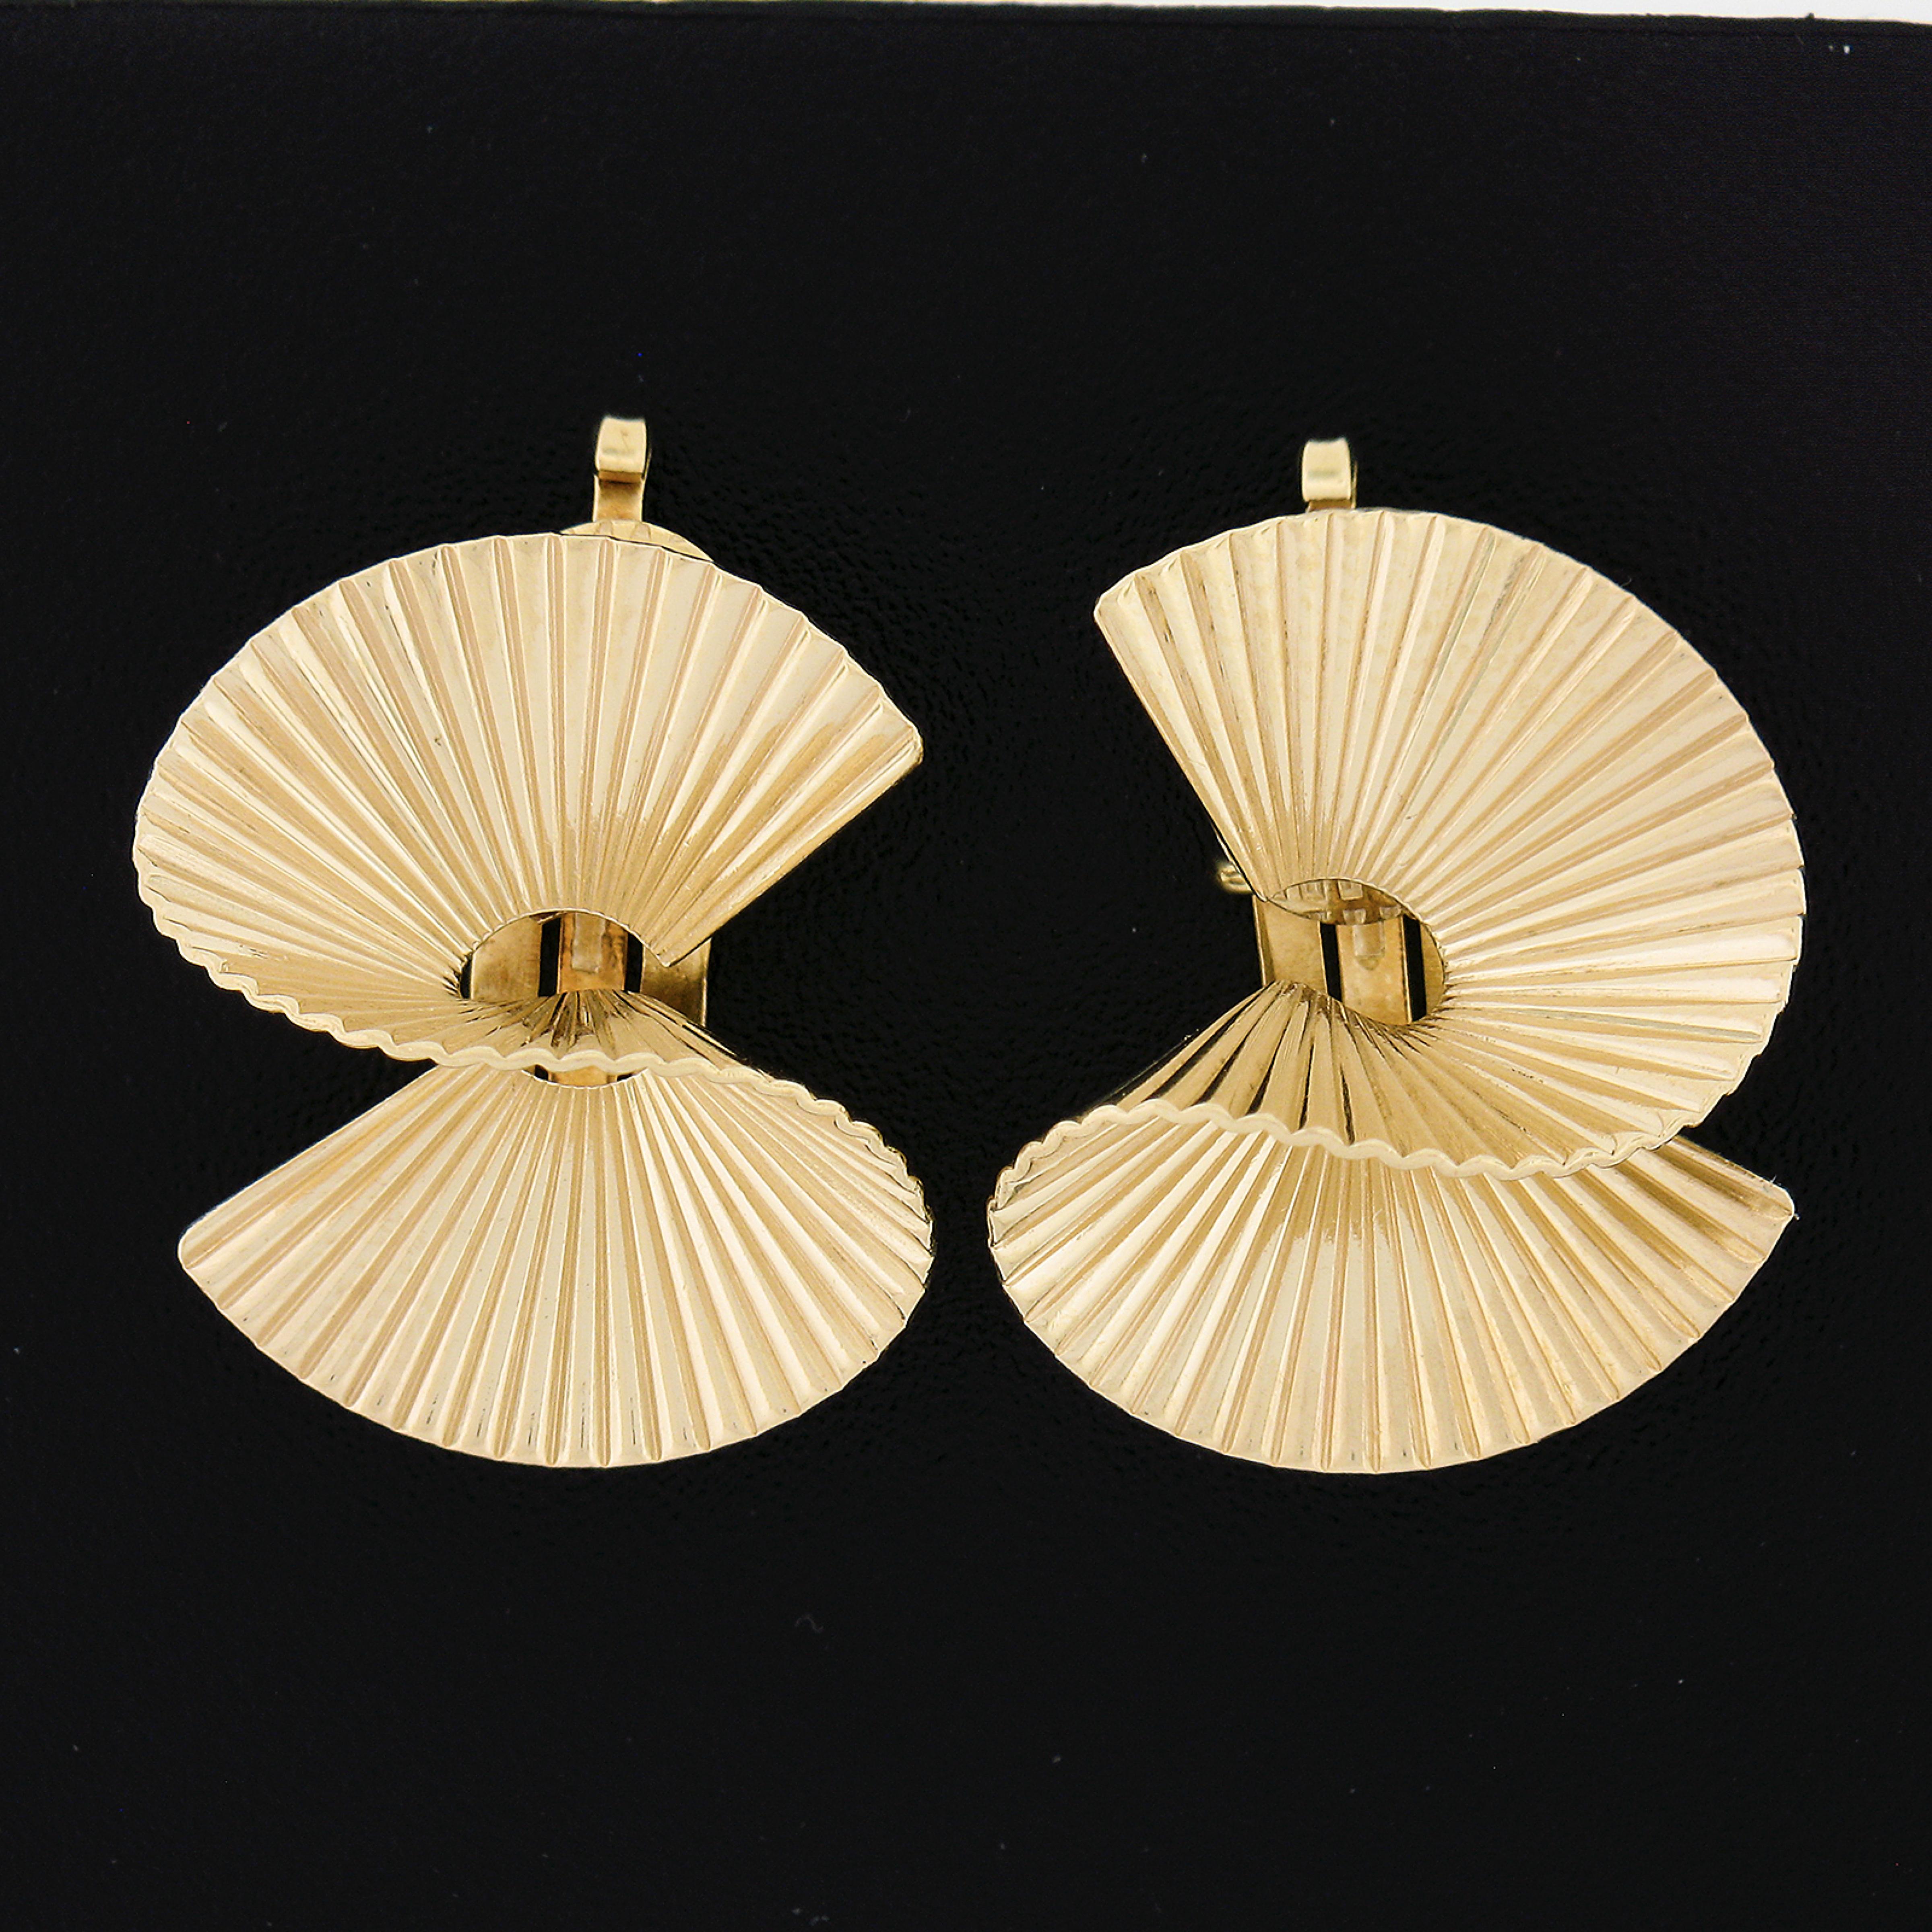 Here we have a gorgeous pair of vintage earrings that are crafted in solid 14k yellow gold. They feature a lovely twisted design with an elegant grooved/fluted pattern throughout that give the pair its unique and attractive look, and they also